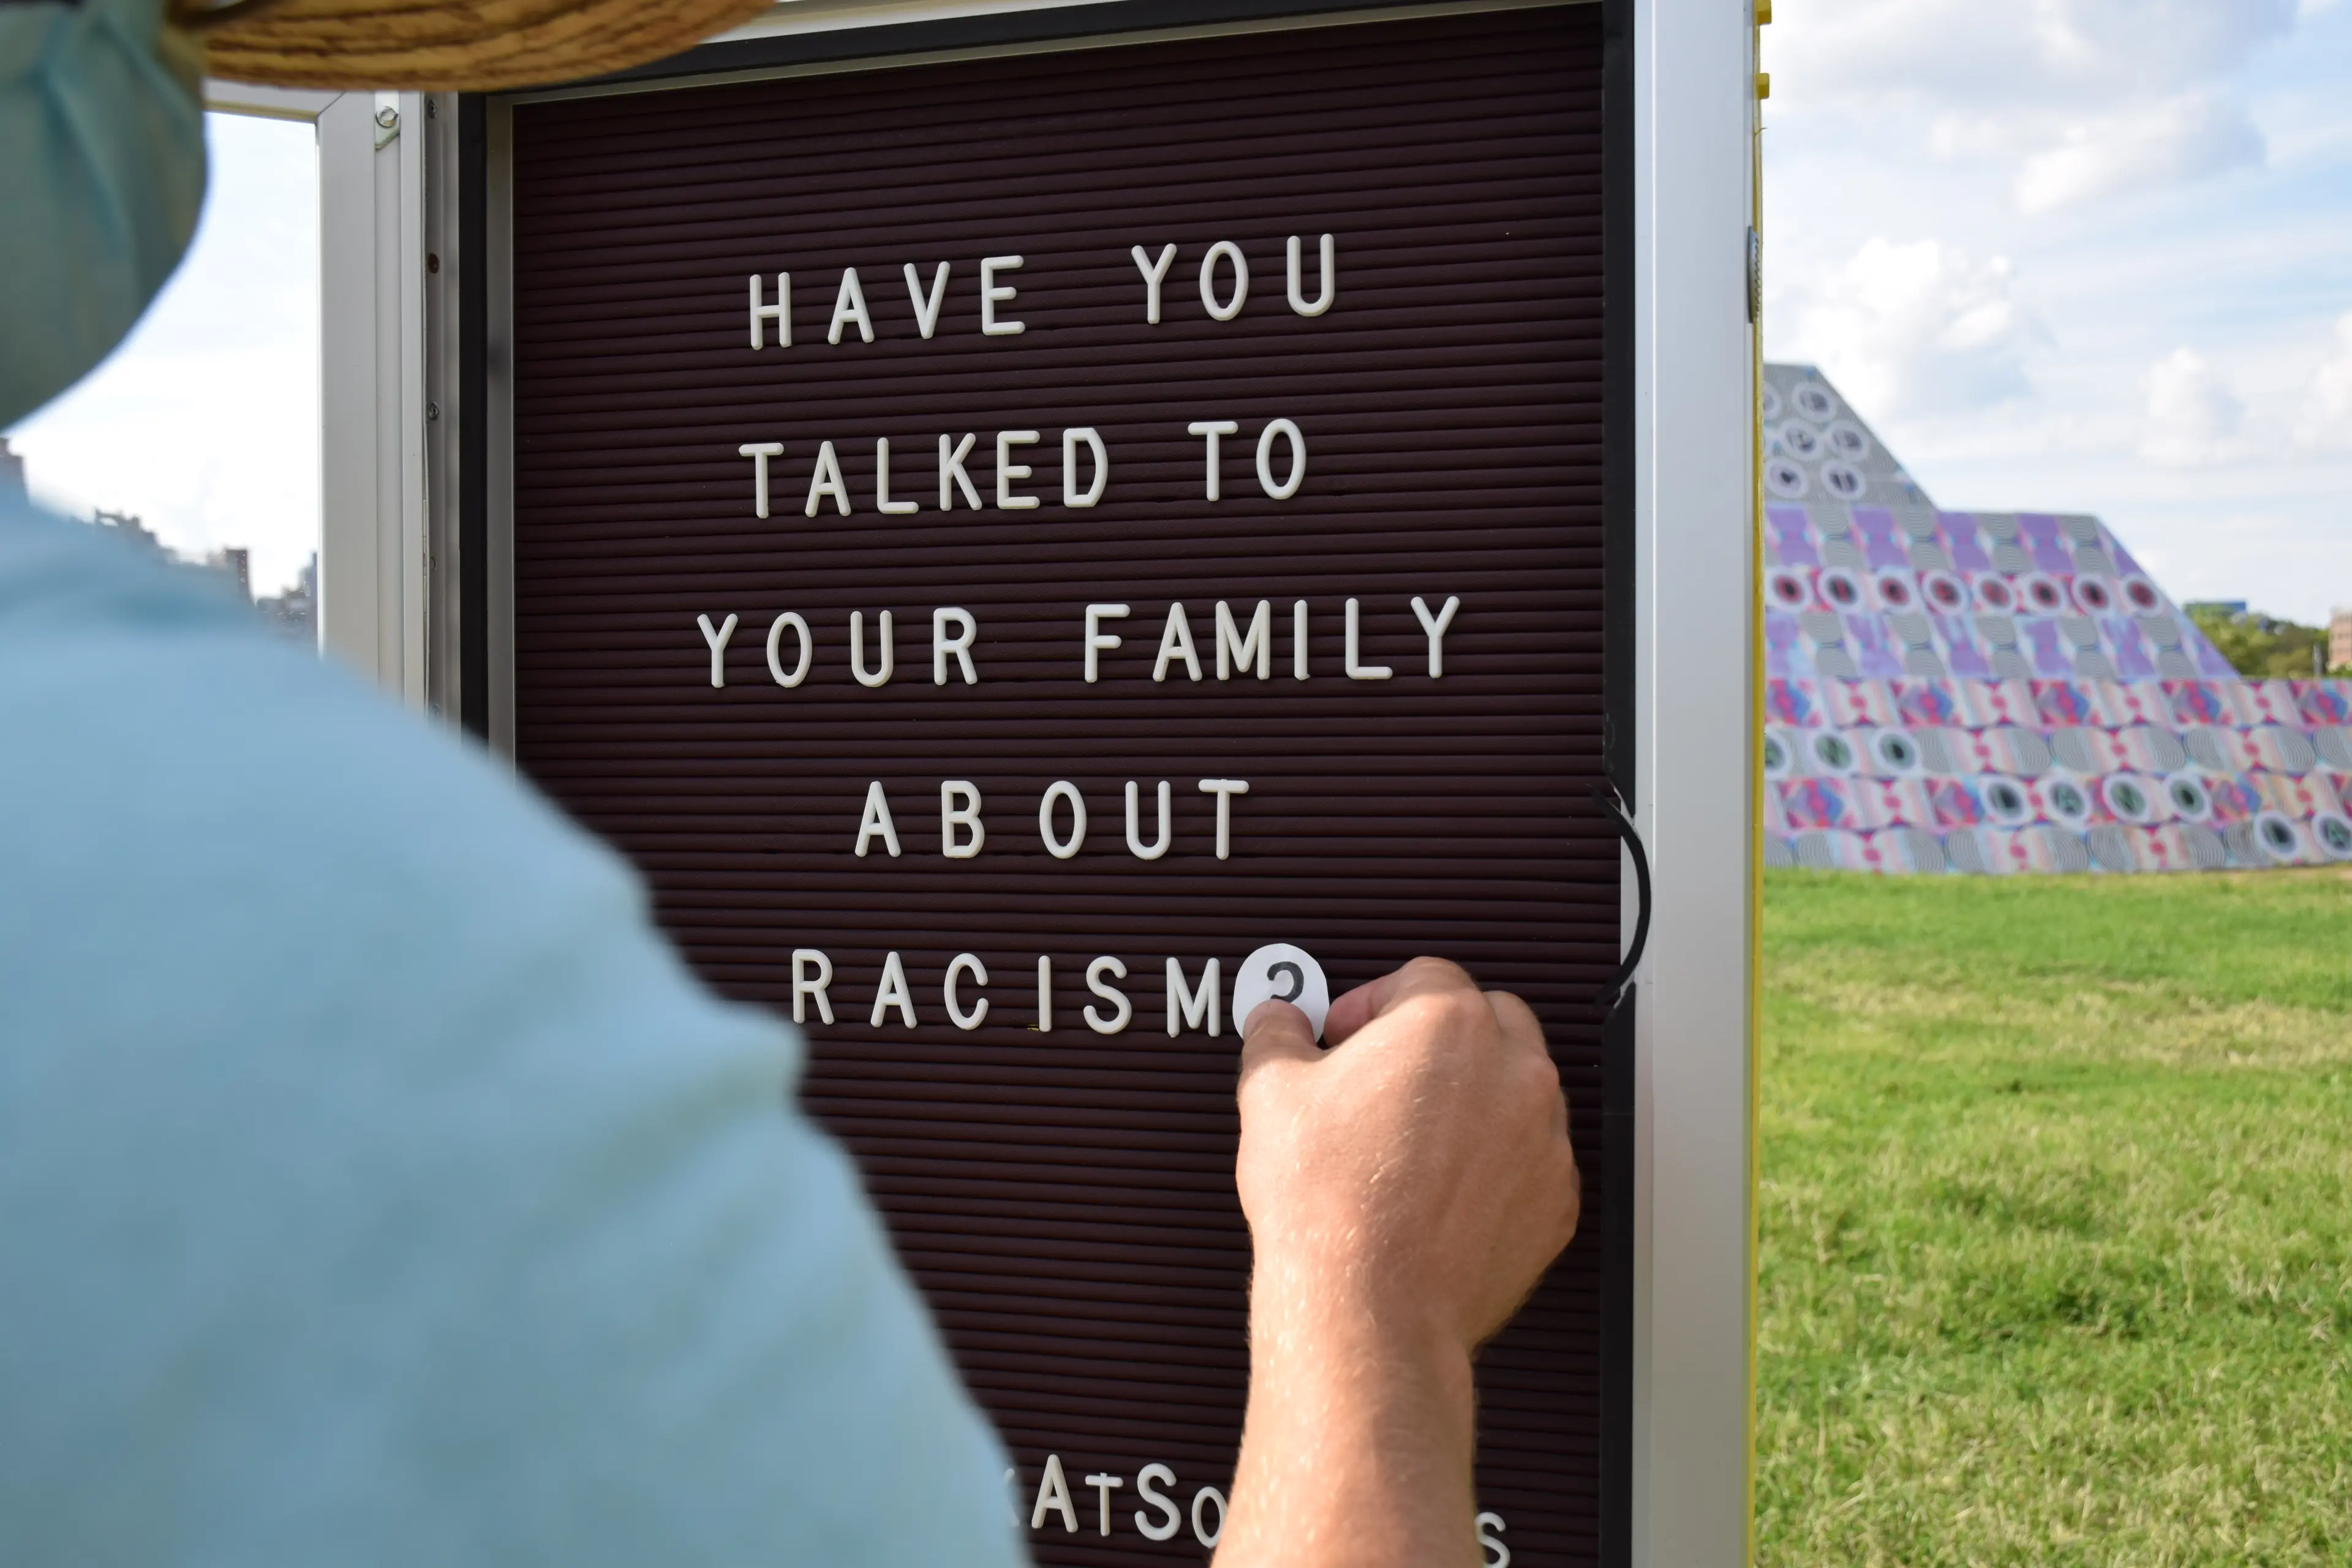 Close up photo of arranging letters on a sign that says "Have you talked to your family about racism"